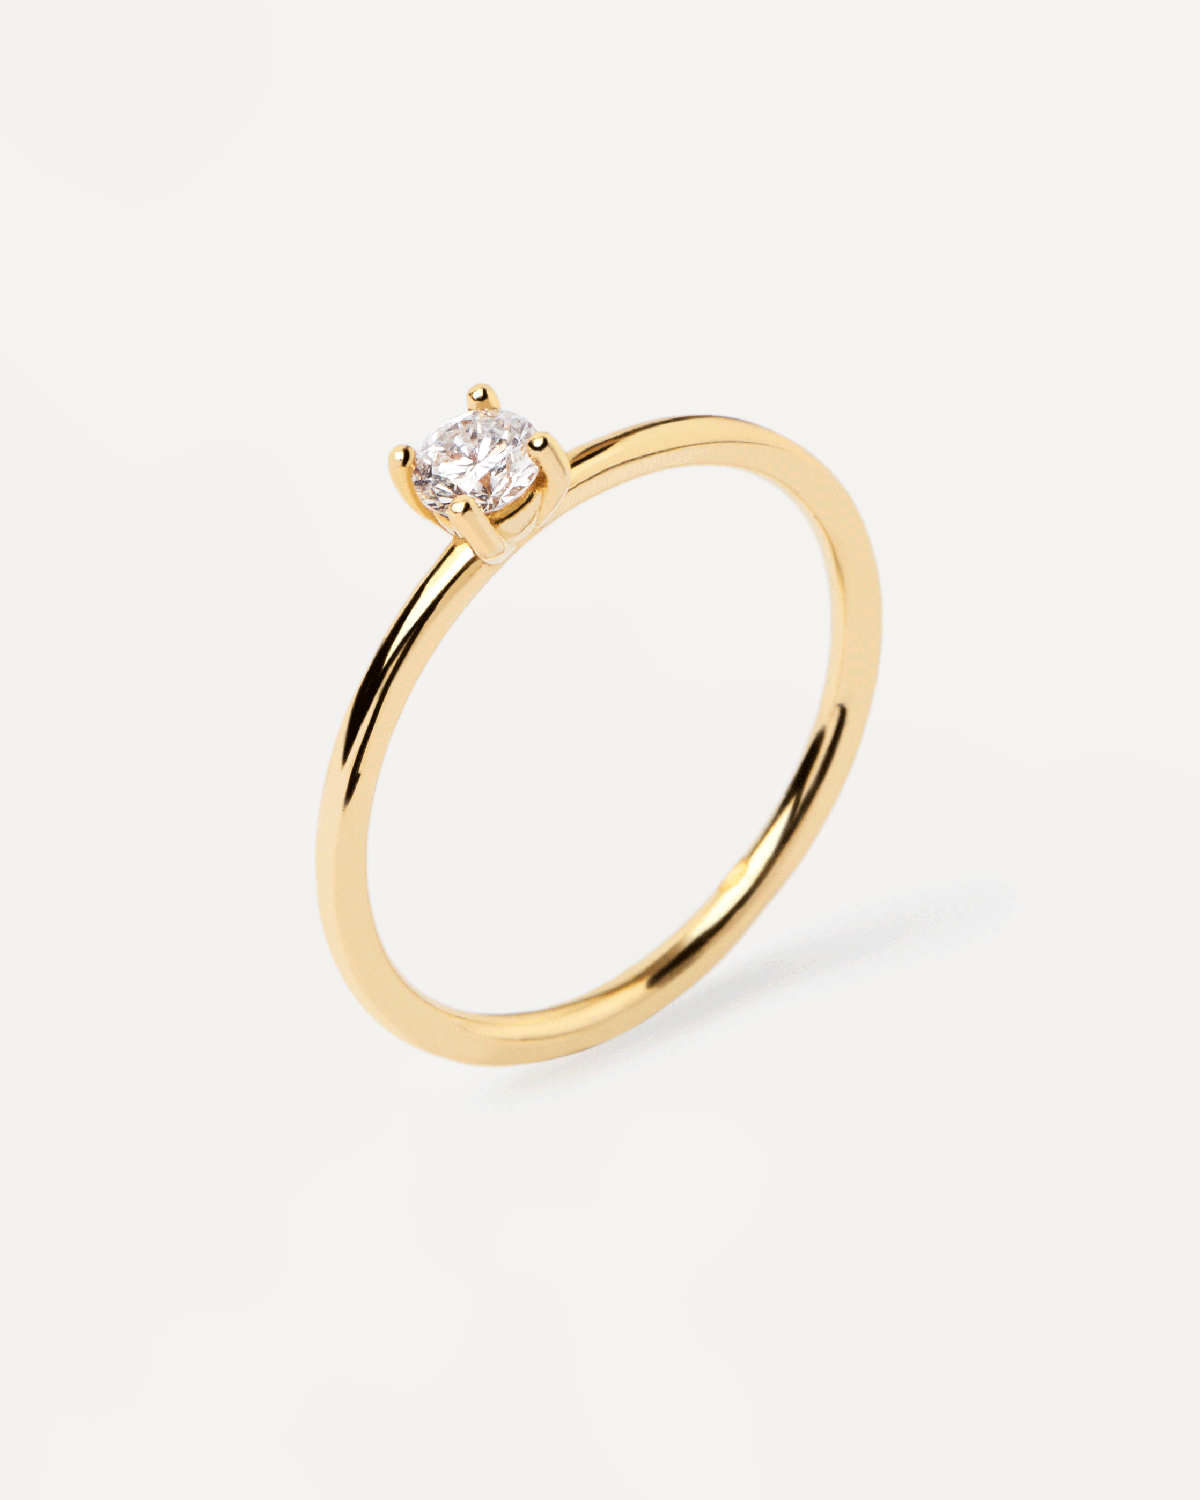 Diamonds and Yellow Gold Solitaire Medium Ring - 18K solid yellow gold